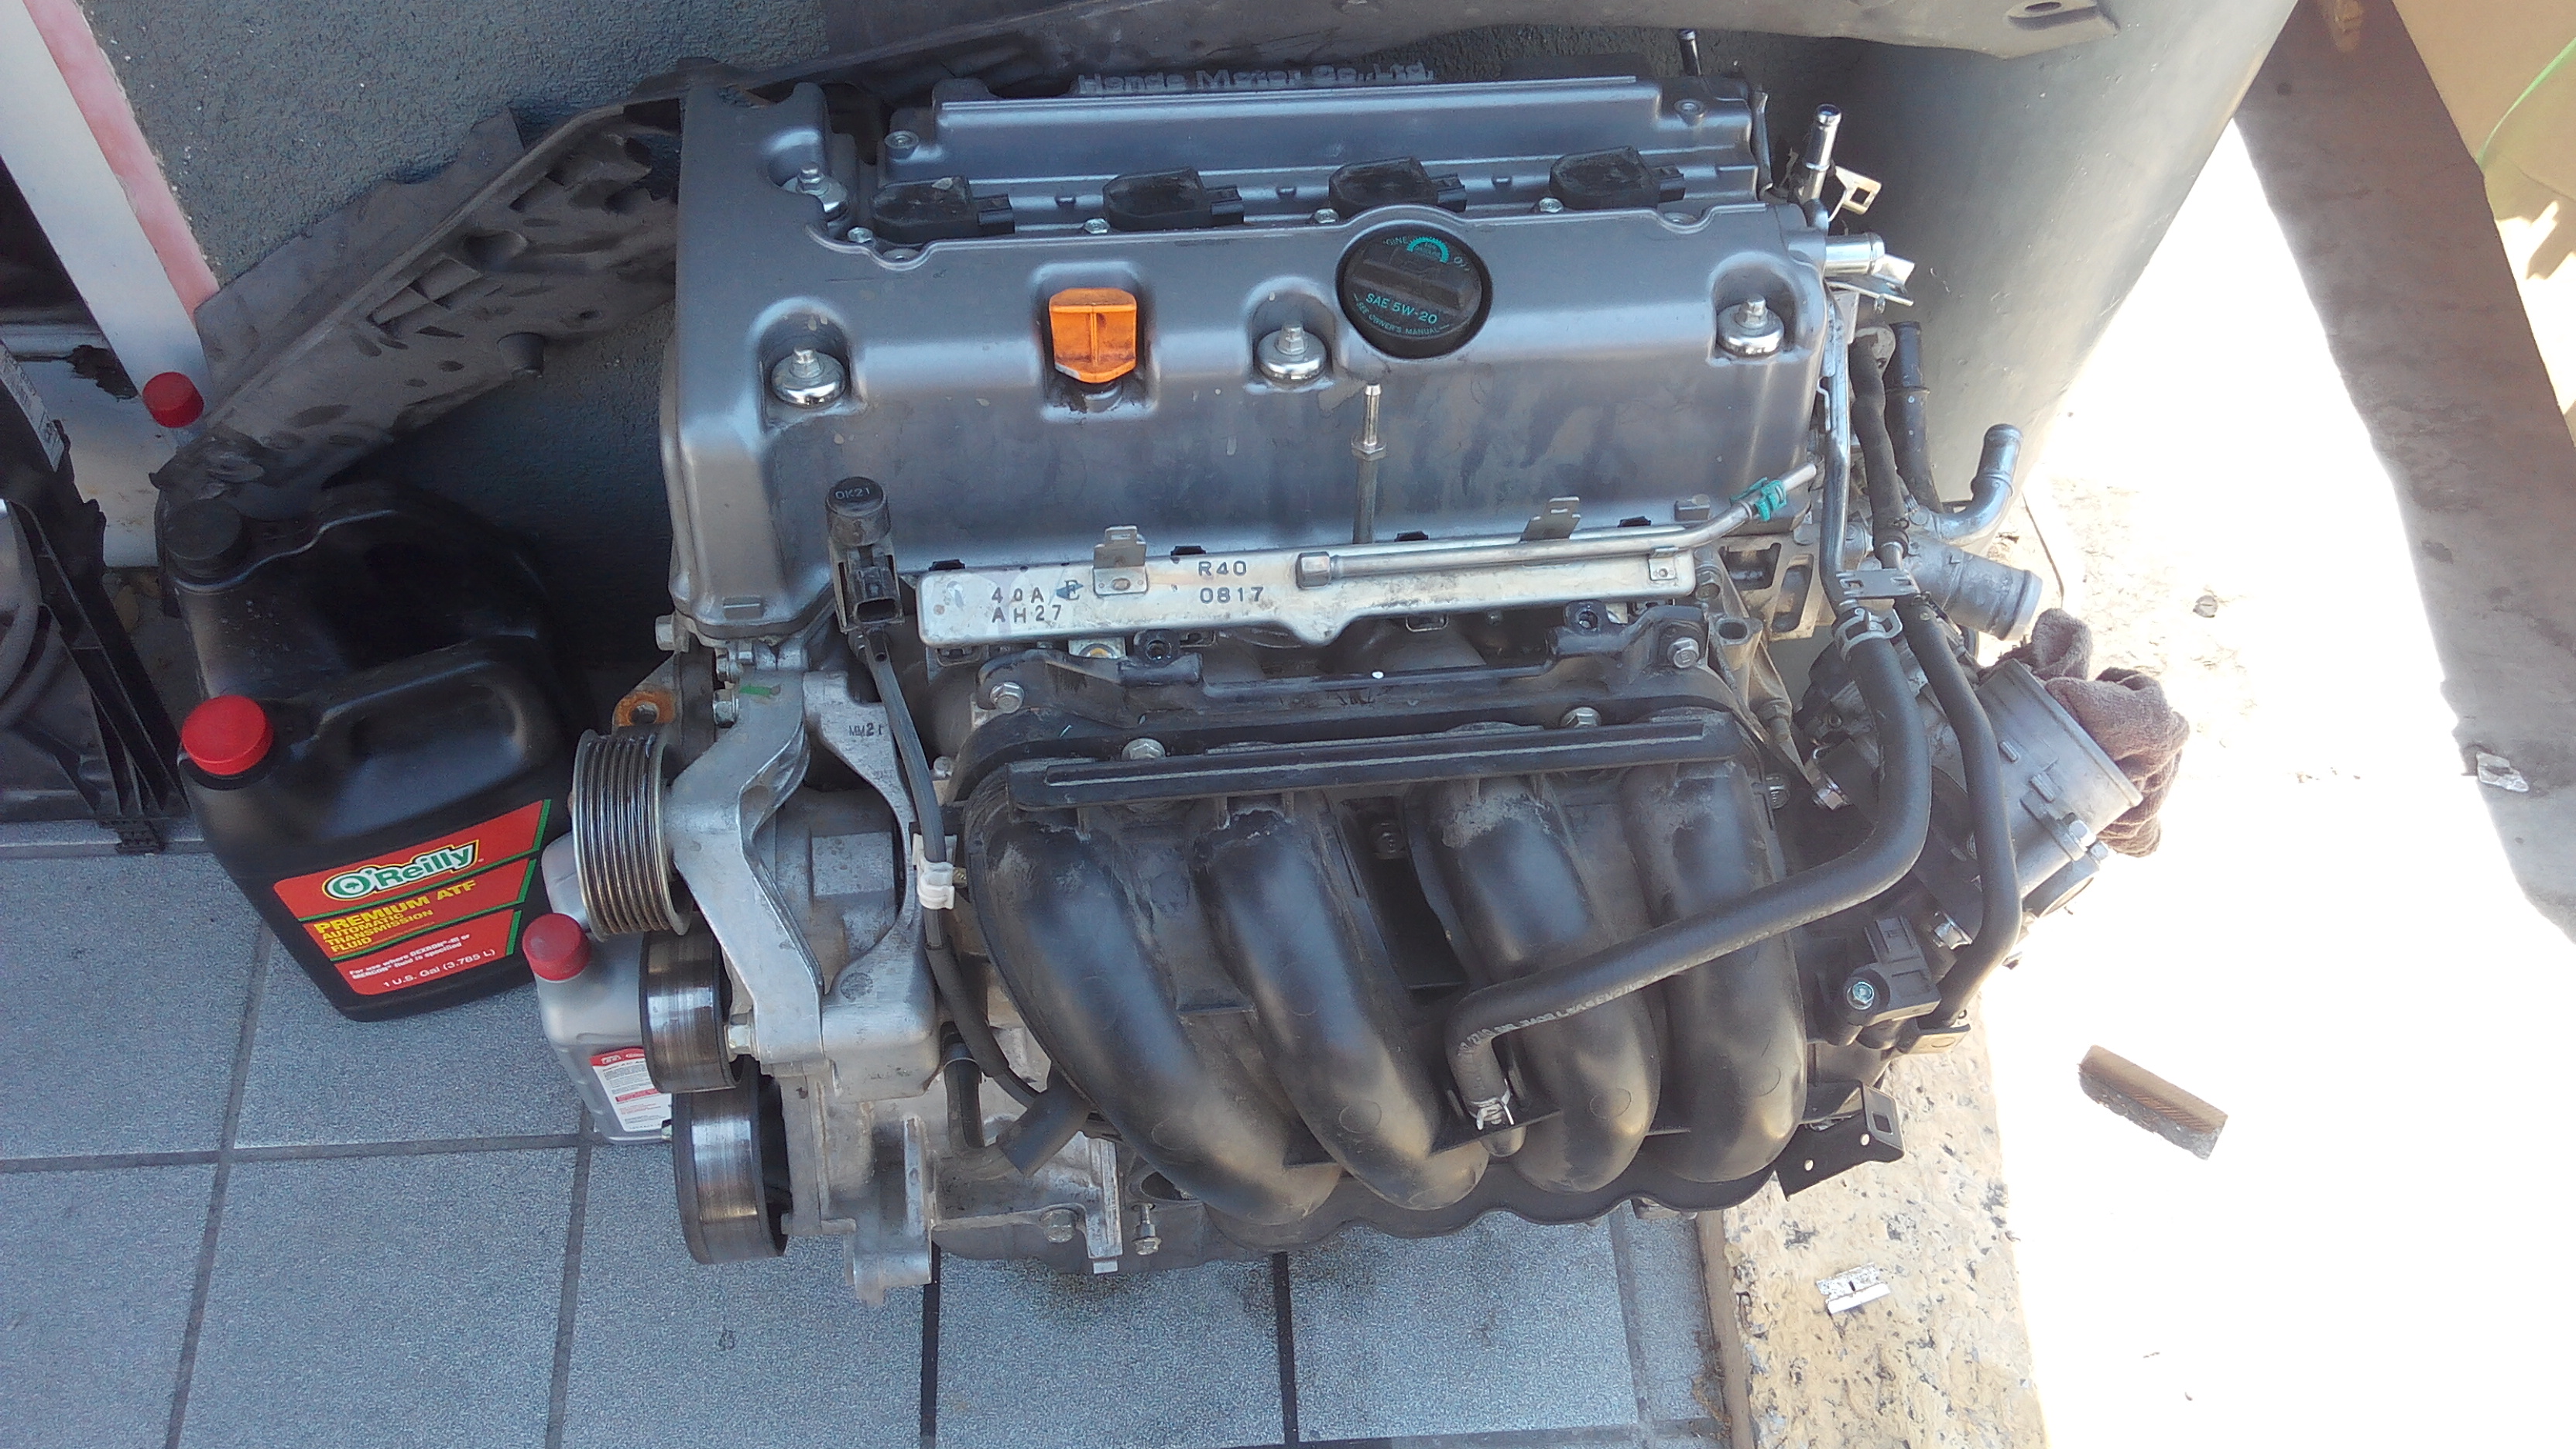 k24z3 pullout from 2010 TSX $300 OBO - Honda-Tech - Honda Forum Discussion.